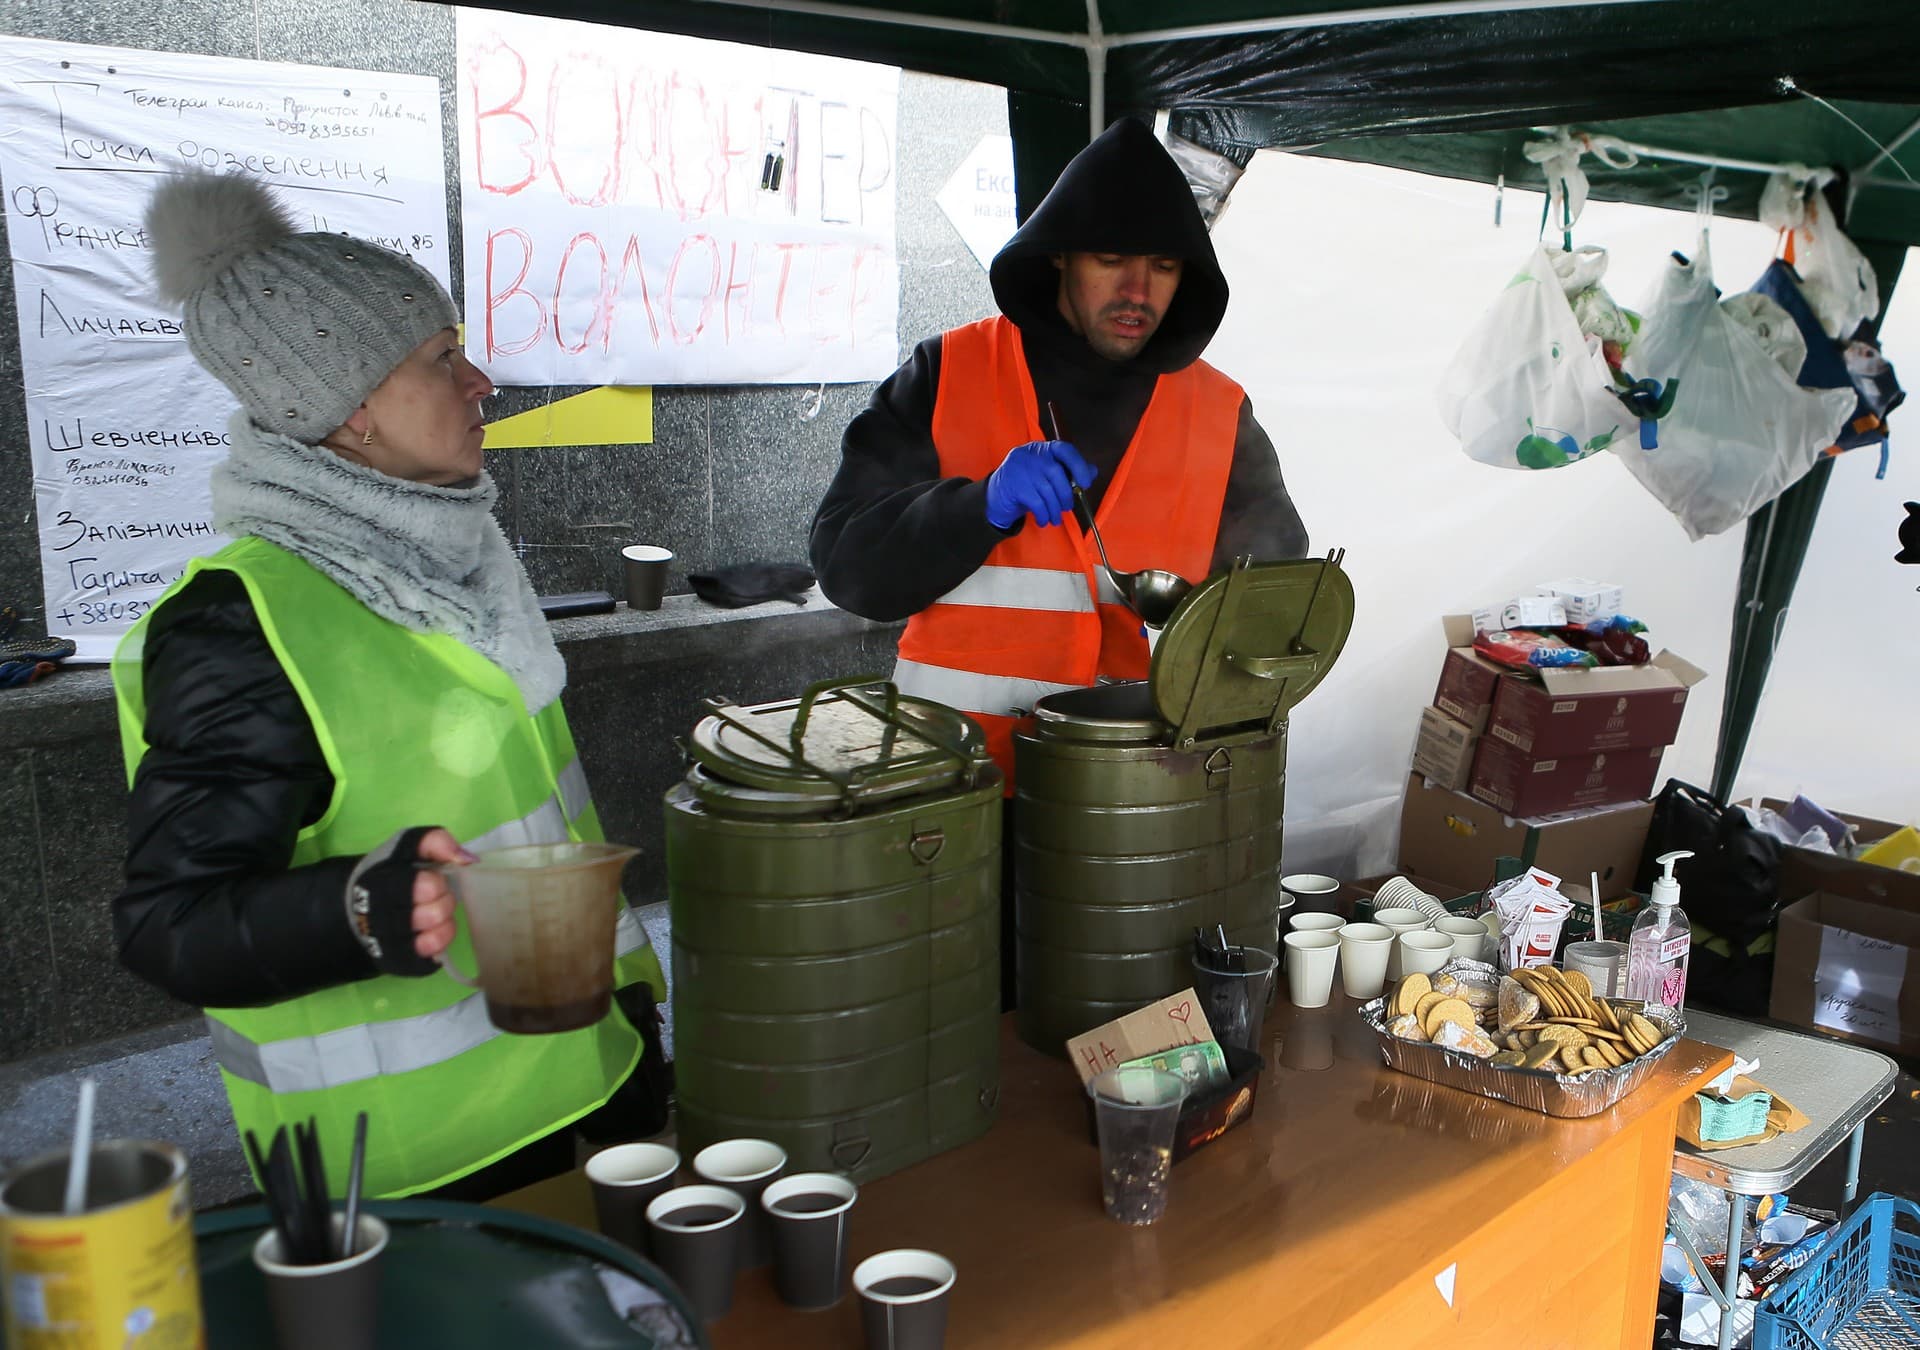 Volunteers distribute hot drinks at the refugee center in Lviv